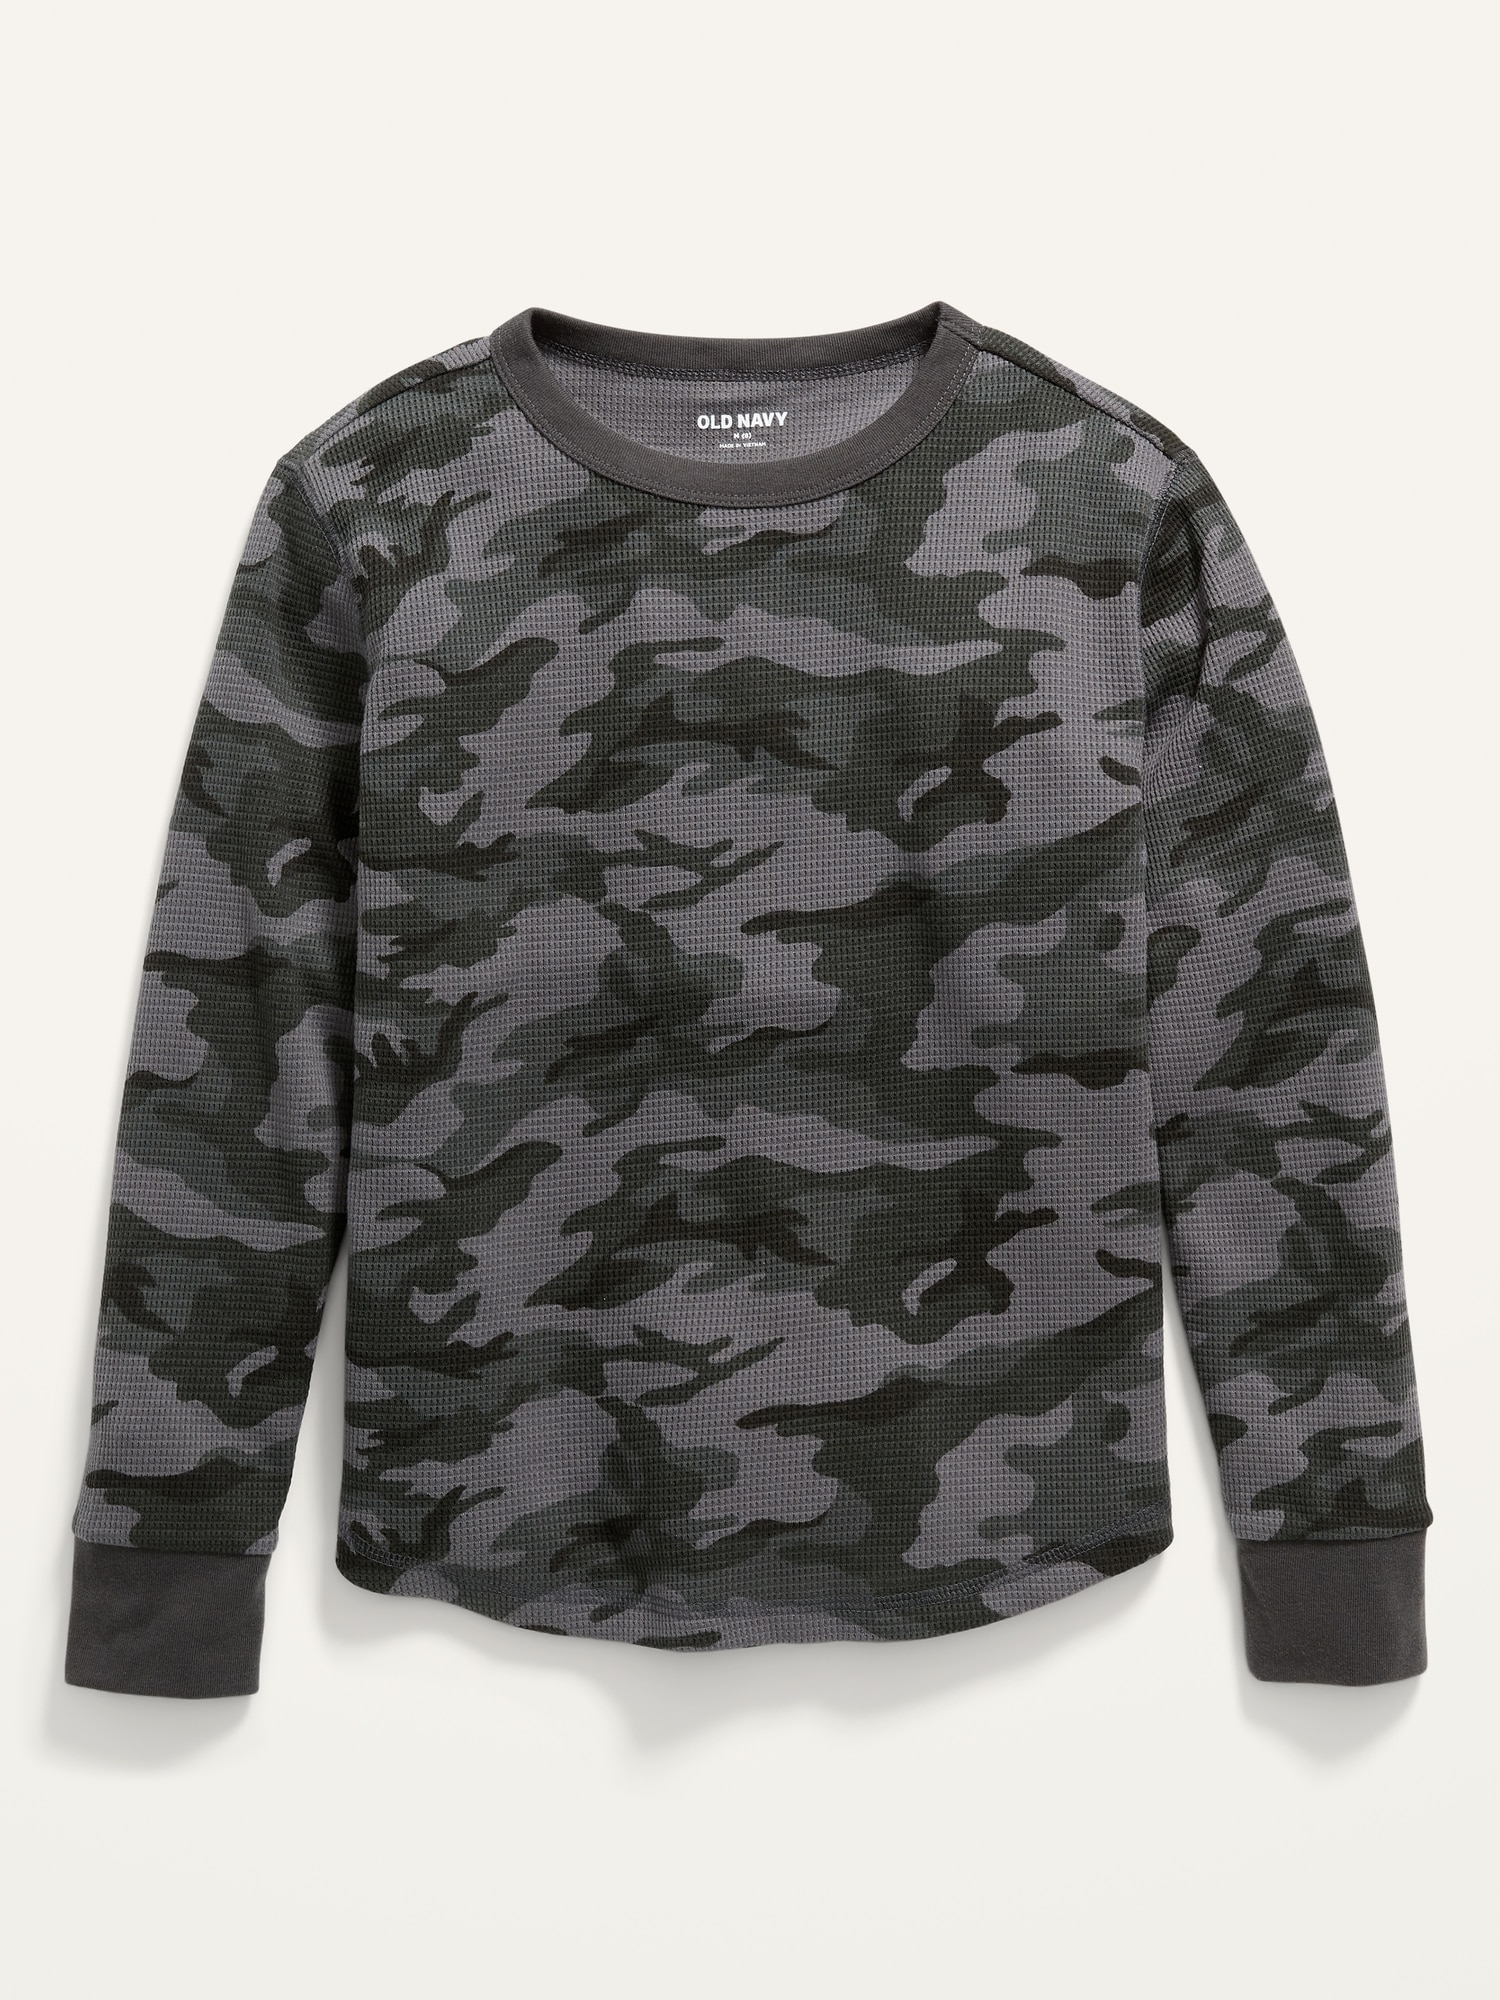 Long-Sleeve Camo-Print Thermal T-Shirt For Boys | Old Navy